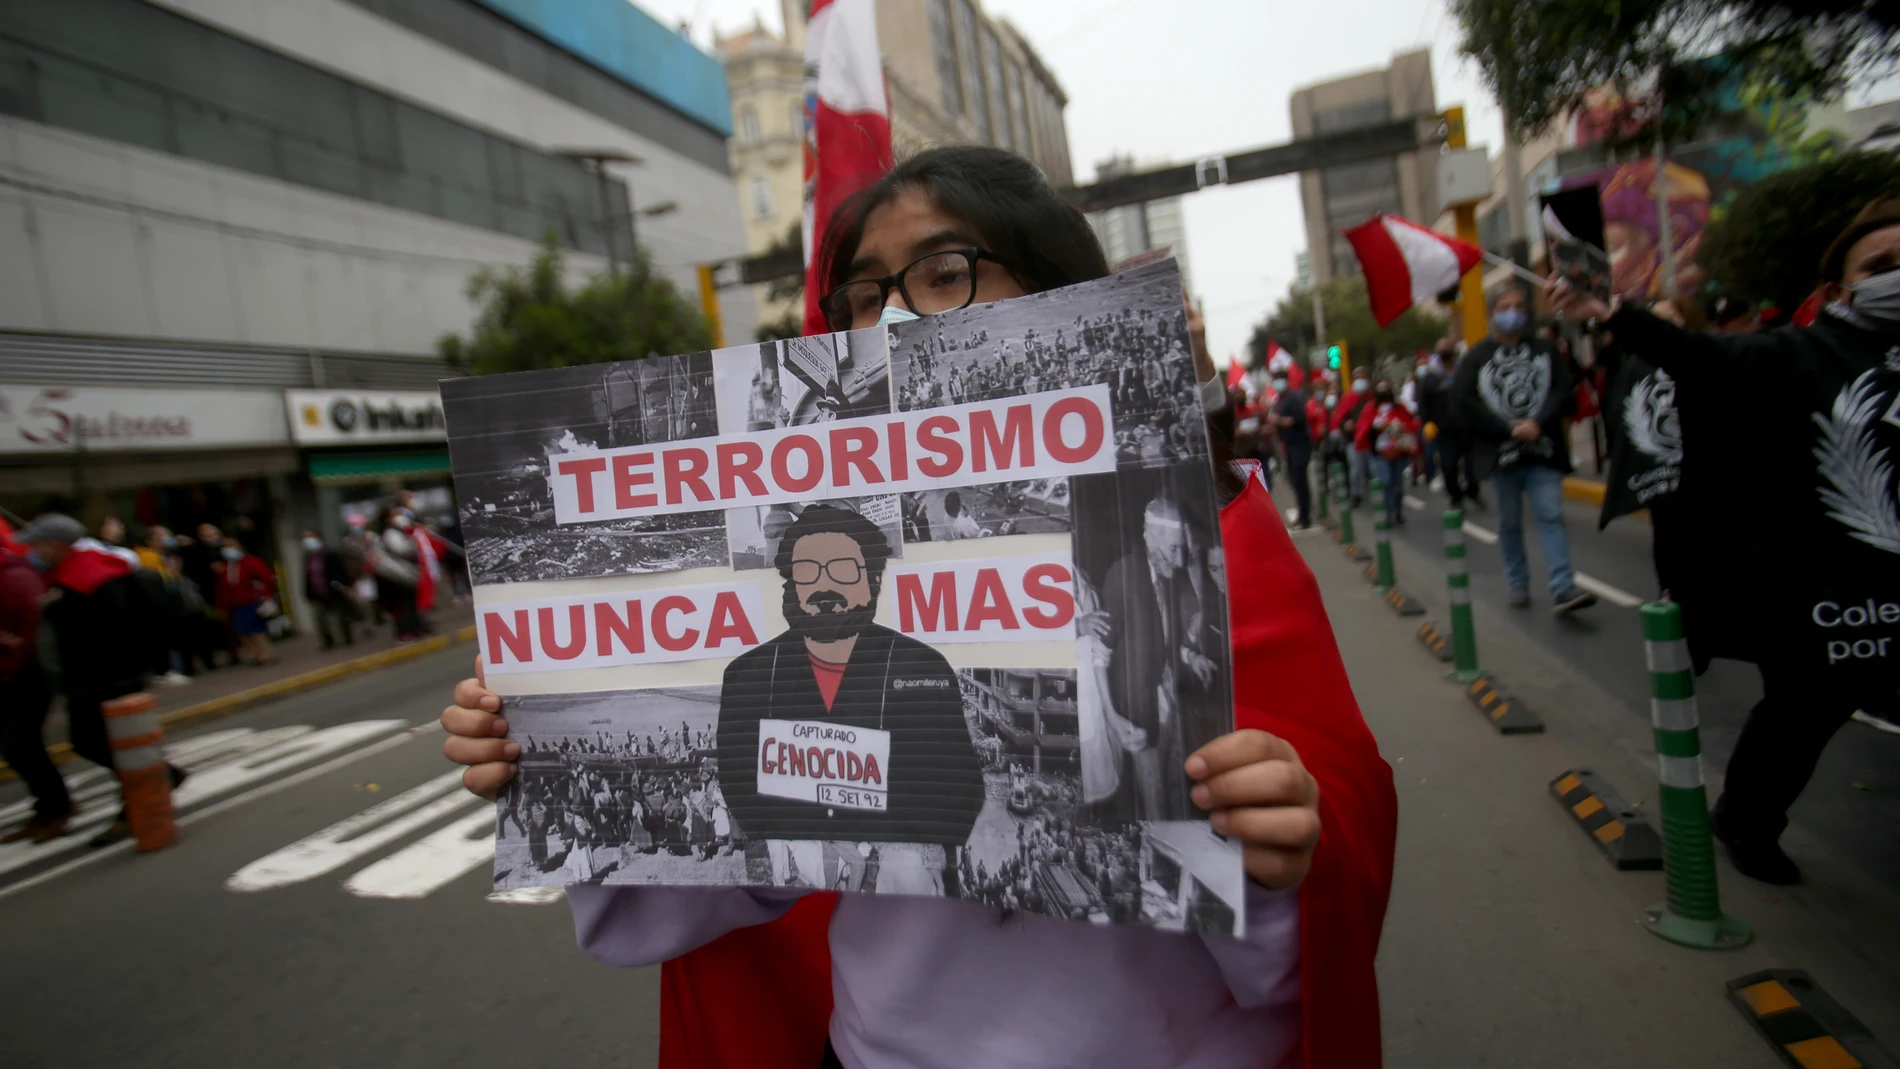 12 September 2021, Peru, Lima: A woman carries a placard describing Peruvian guerrilla leader Guzman as a mass murderer at a demonstration marking his death. Abimael Guzman, the former leader of the Peruvian guerrilla organization Shining Path (Sendero Luminoso), died at the age of 86 in a maximum-security prison, the prison administration announced on Saturday. Almost 70,000 people were killed in clashes between the Sendero Luminoso and state security forces between 1980 and 2000. Photo: Cesar Lanfranco/dpa12/09/2021 ONLY FOR USE IN SPAIN